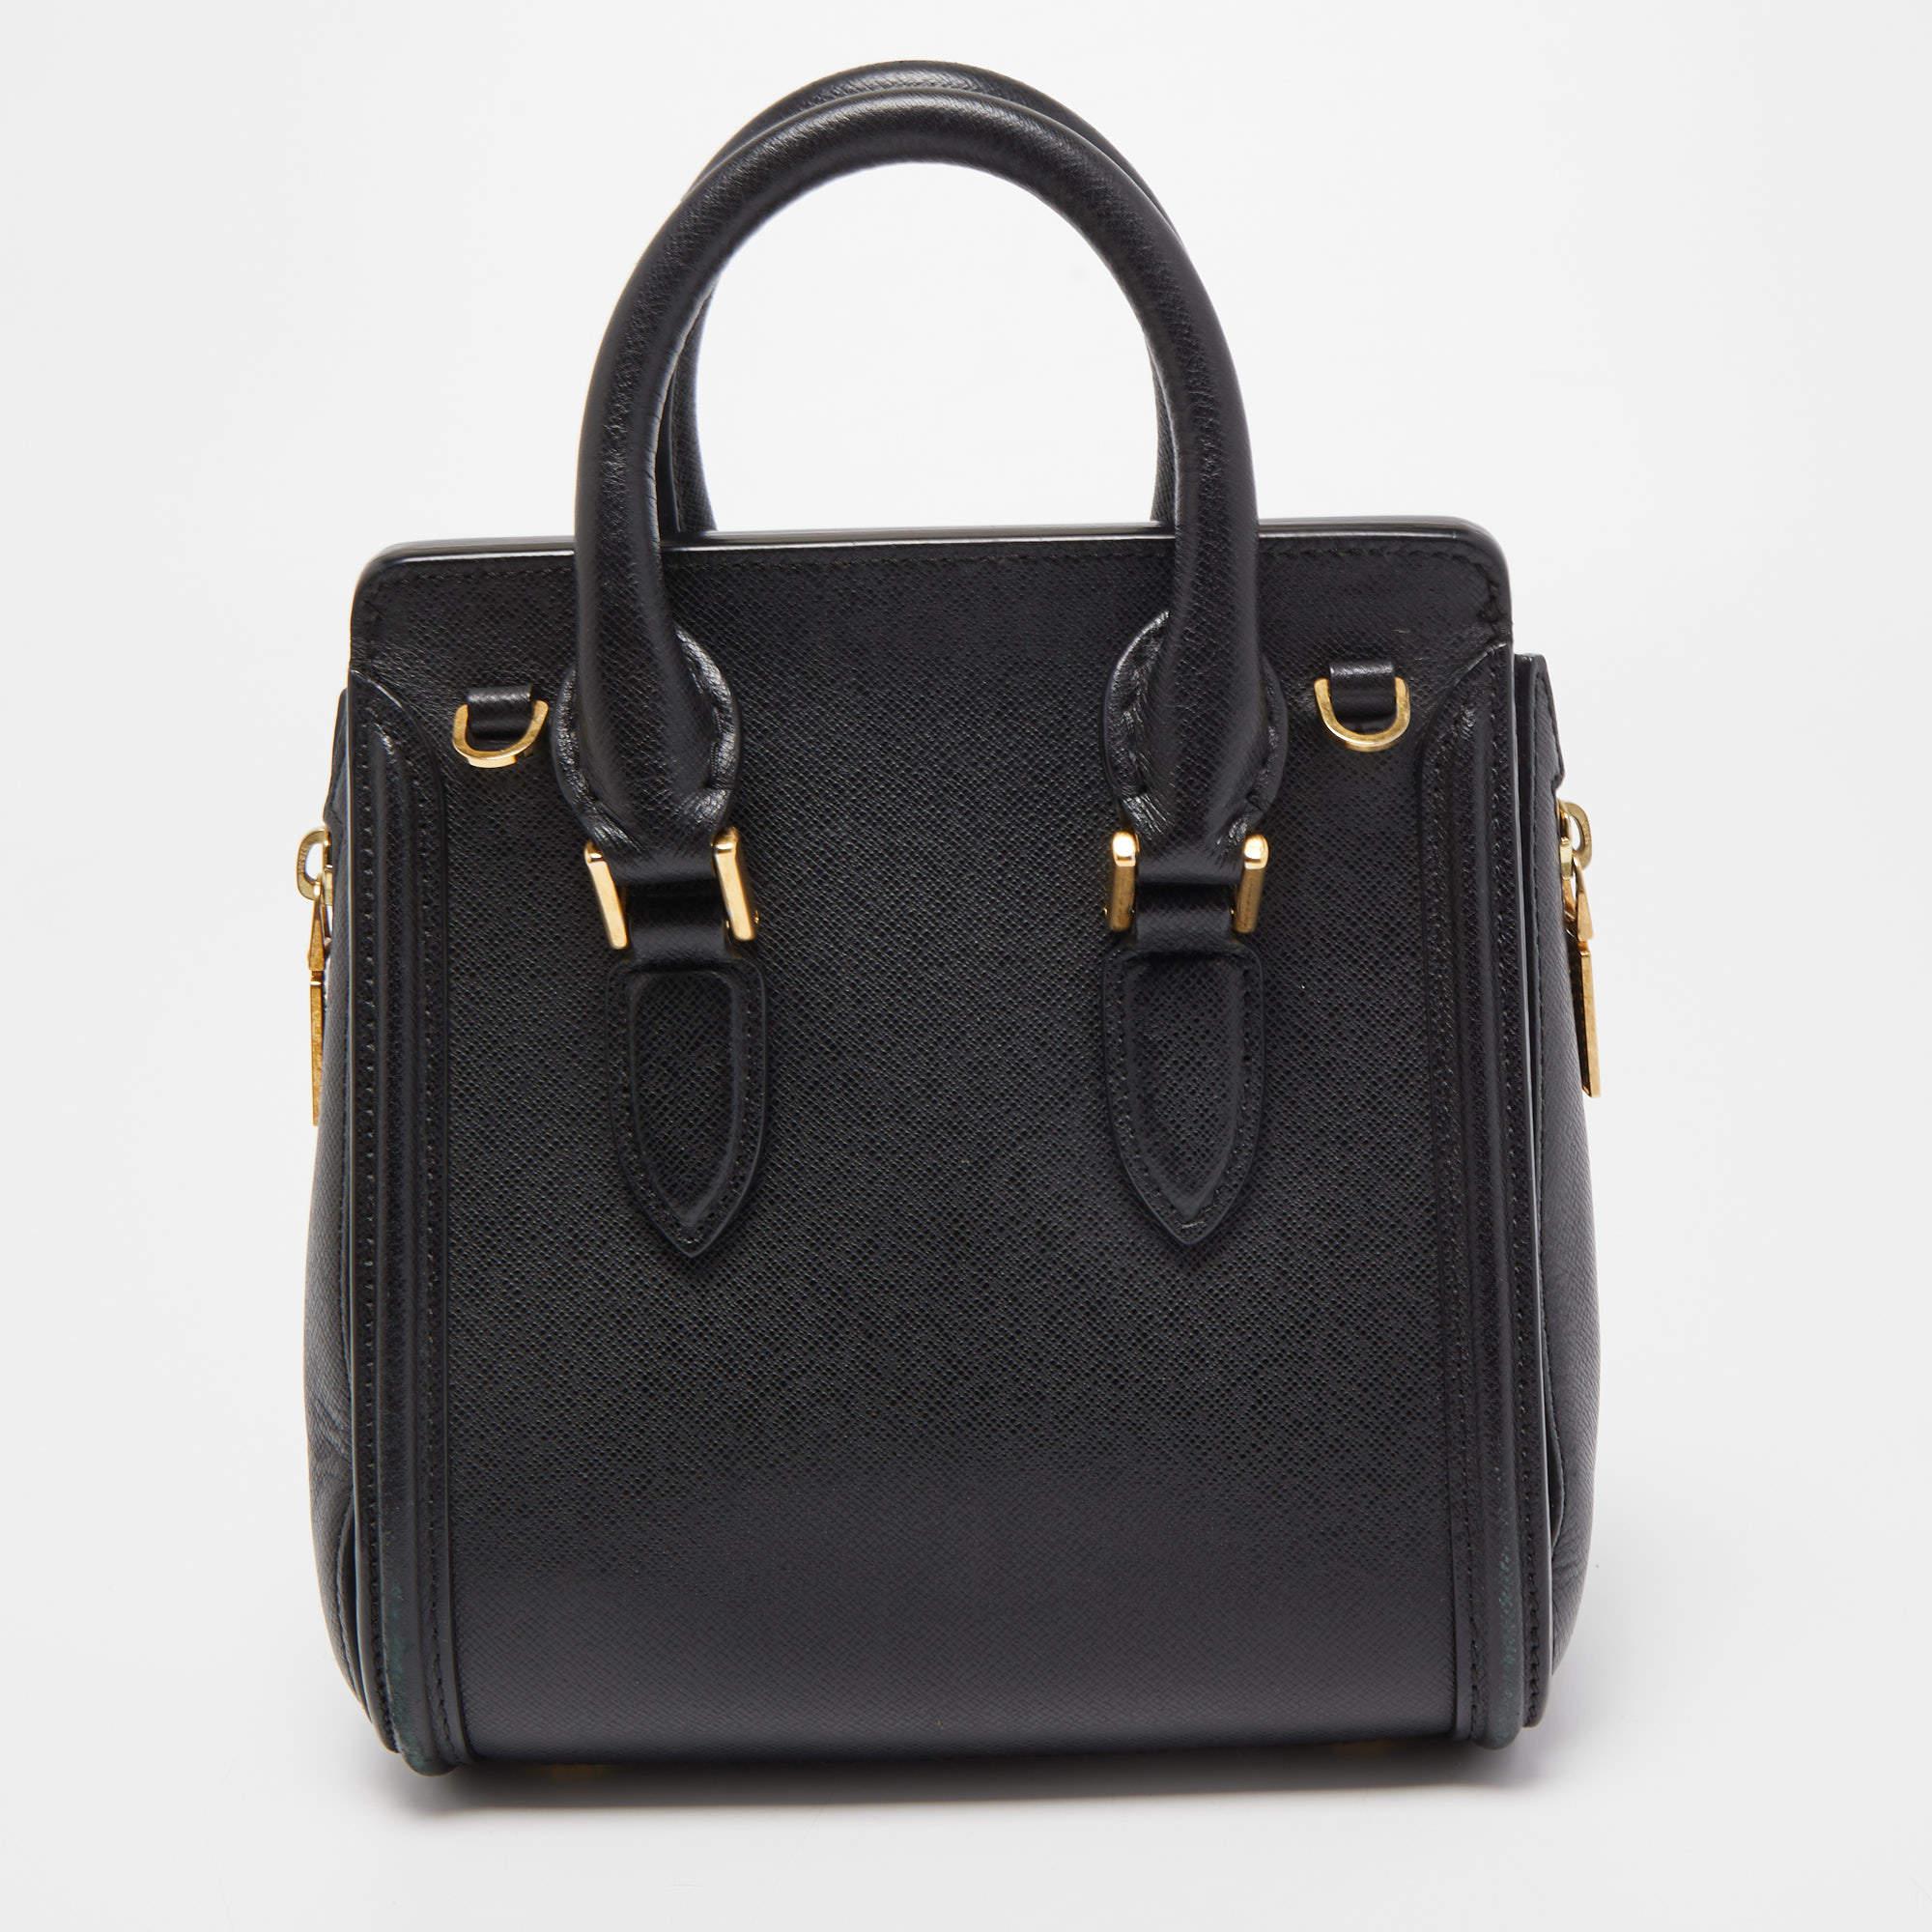 Stylish and easy to carry, this designer satchel will be a fine choice for work or after. Lined well, this pre-loved bag for women can easily fit all your essentials. It can be held in your arm or hand.

Includes: Detachable Strap